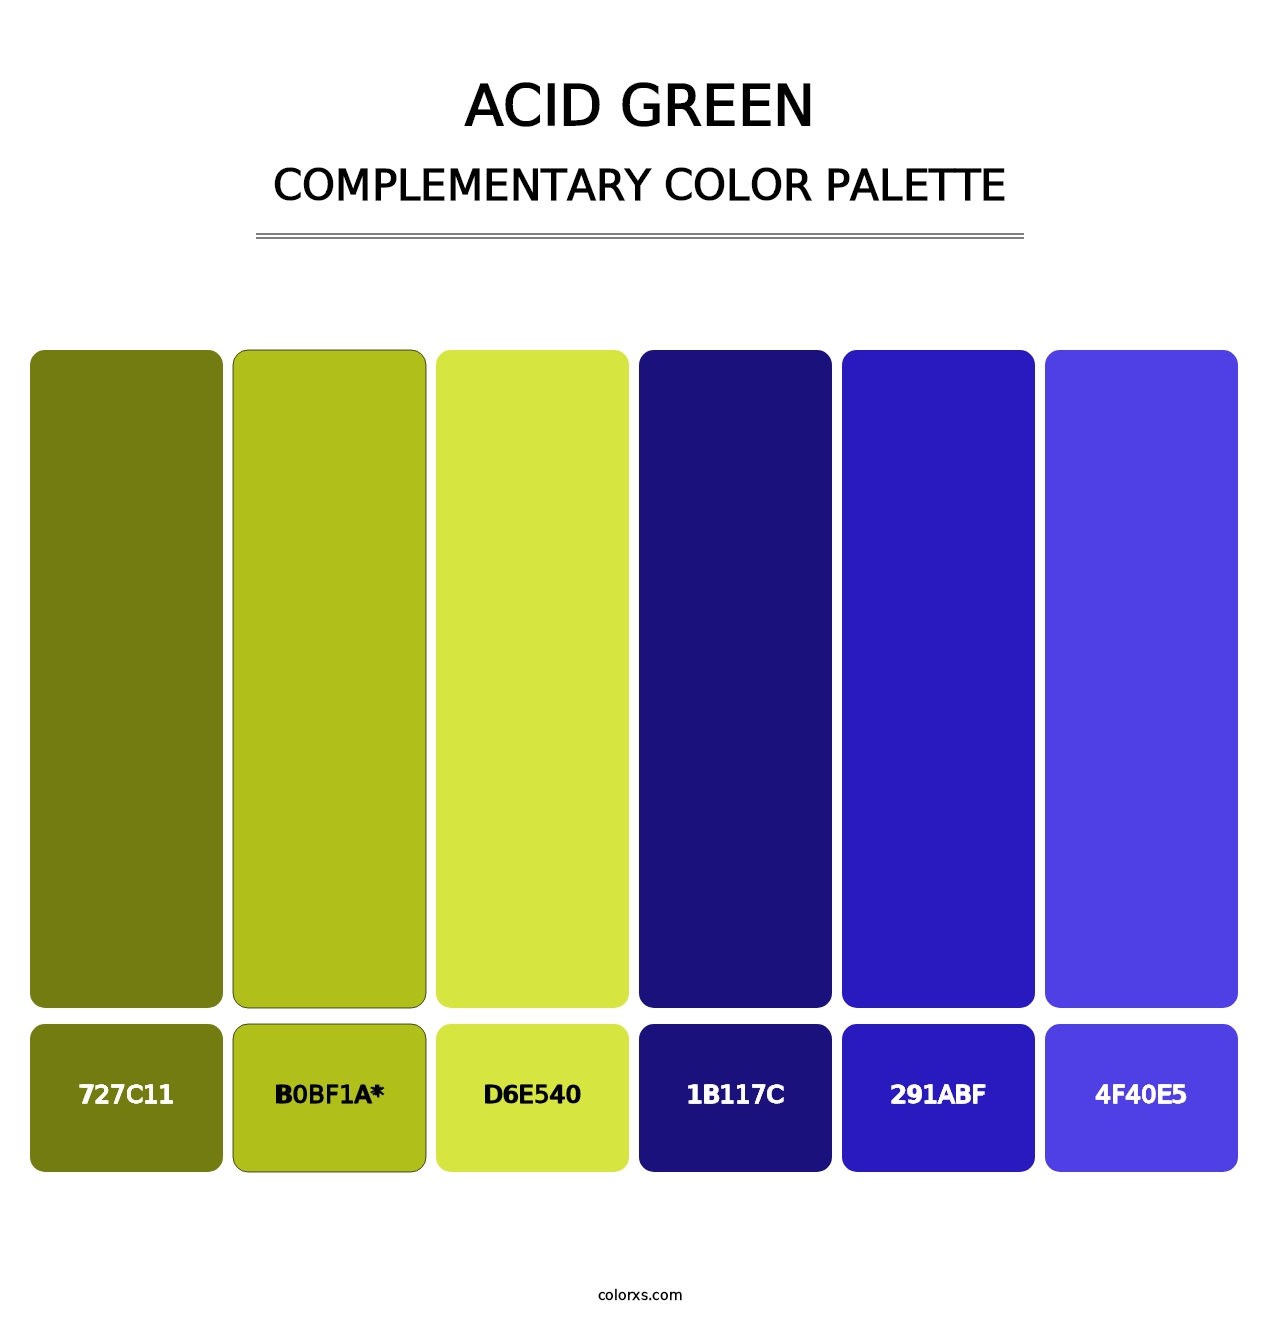 Acid Green - Complementary Color Palette